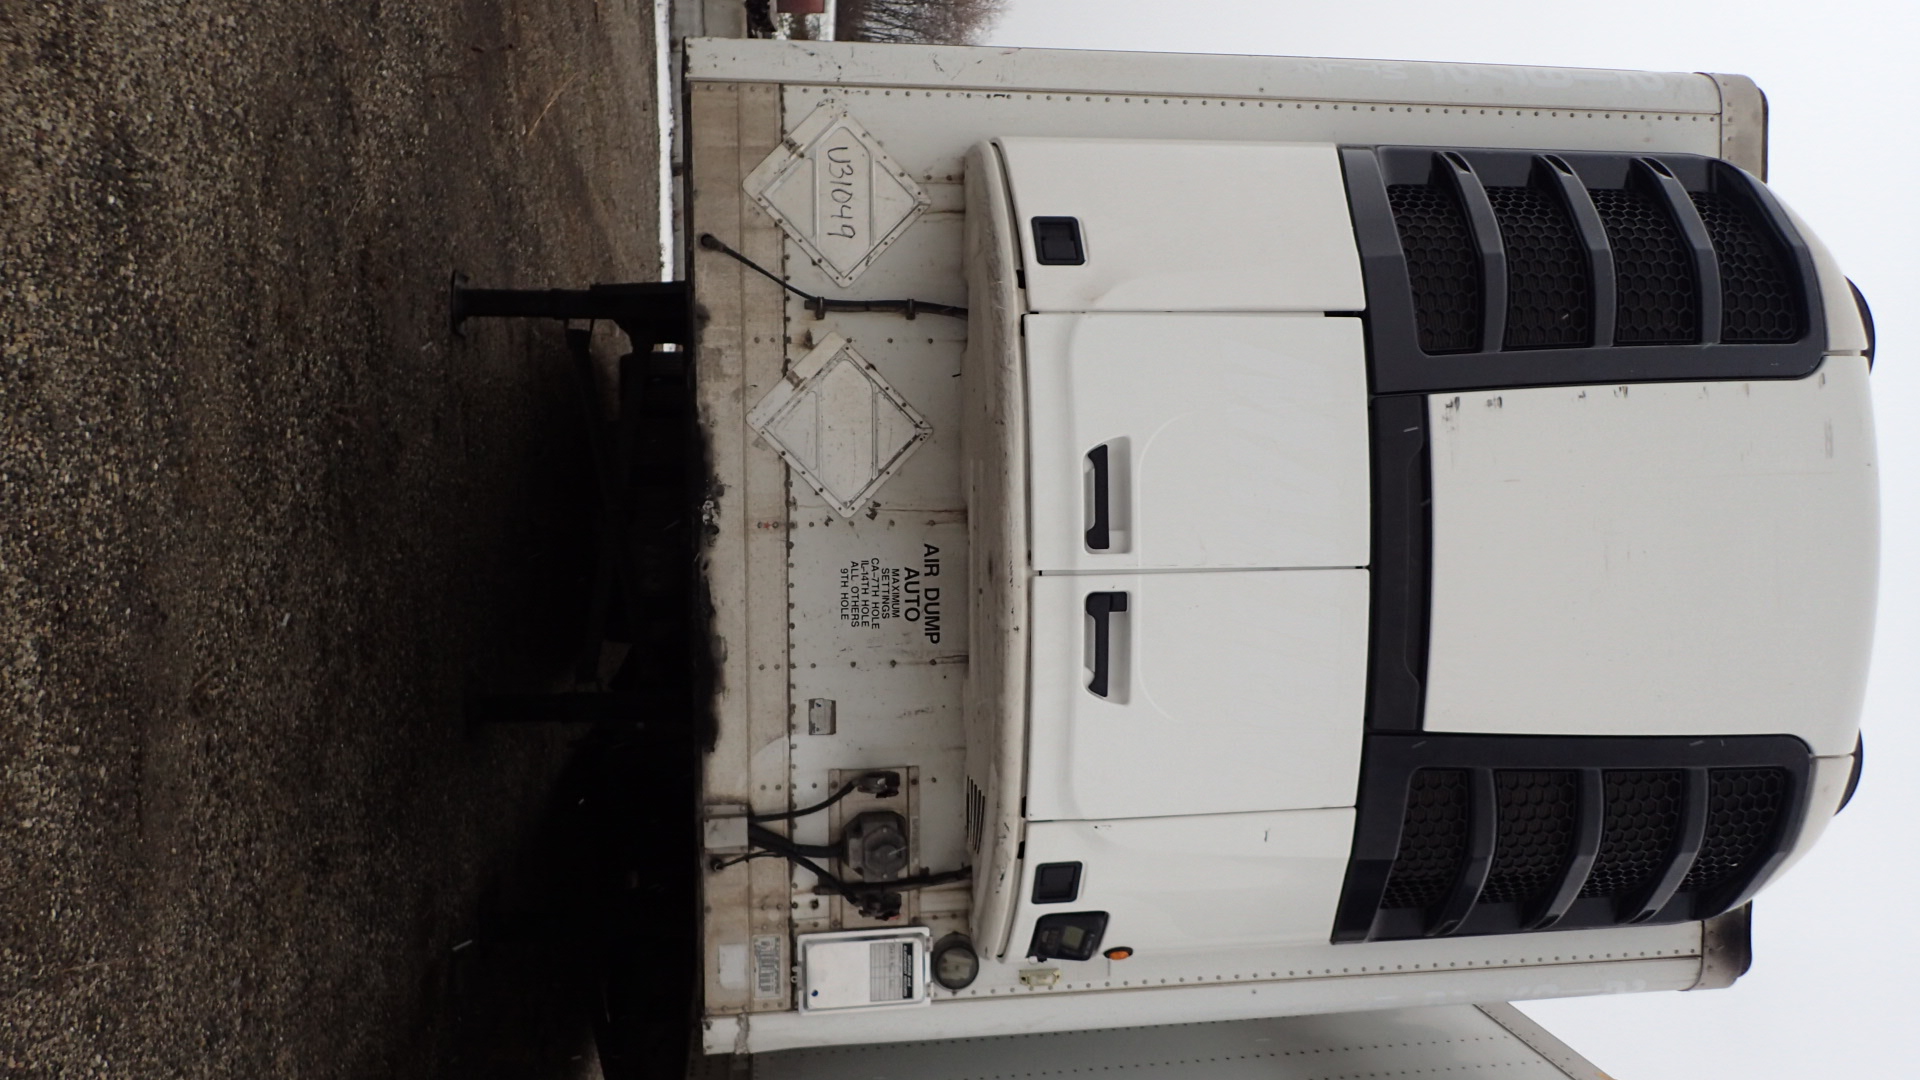 2016 UTILITY REEFER (USED Trailer)